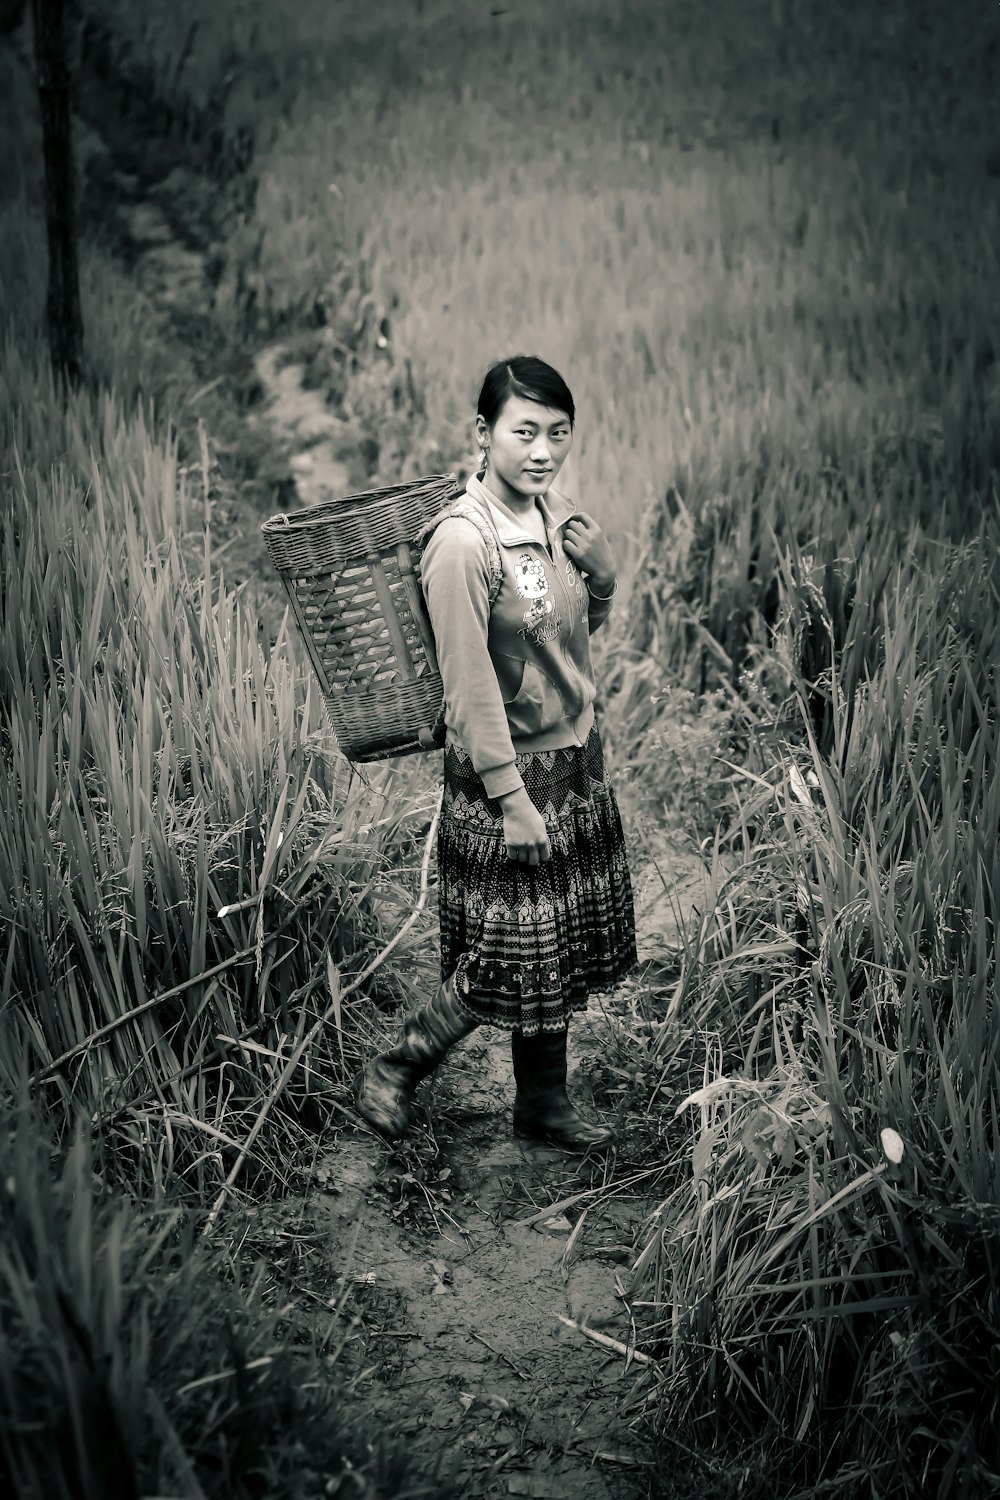 a young girl carrying a basket in a field